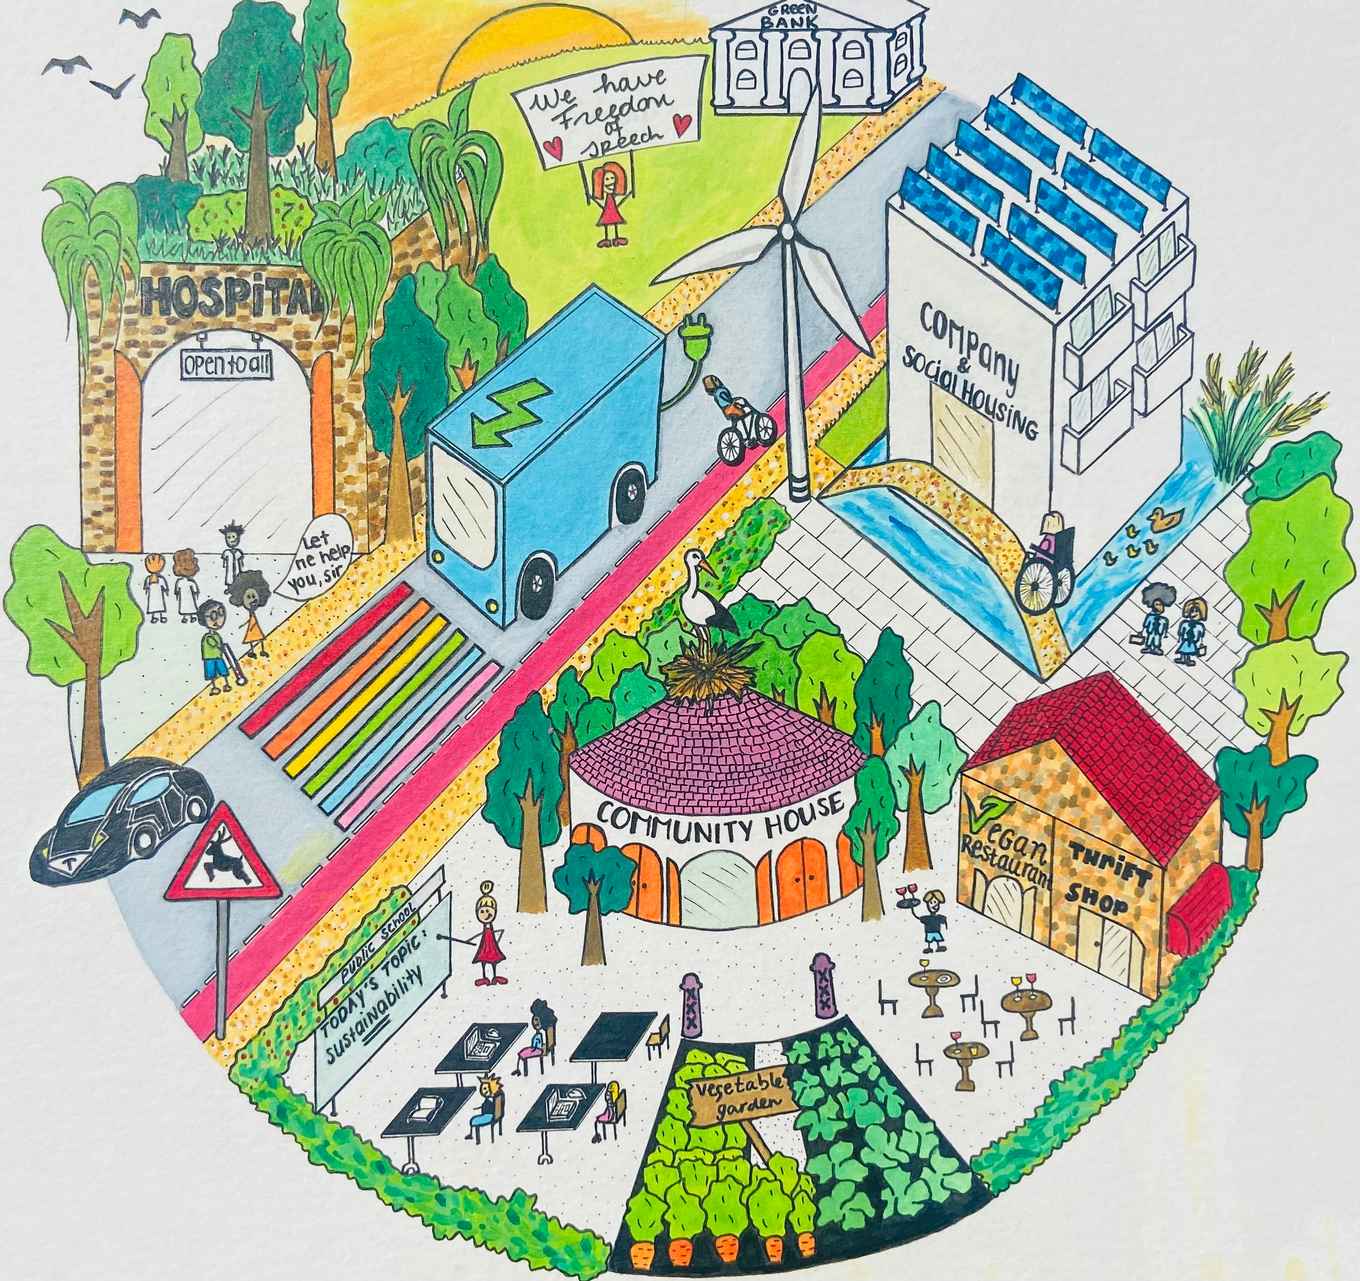 A sustainable city, drawn by a member of the SUSA-team